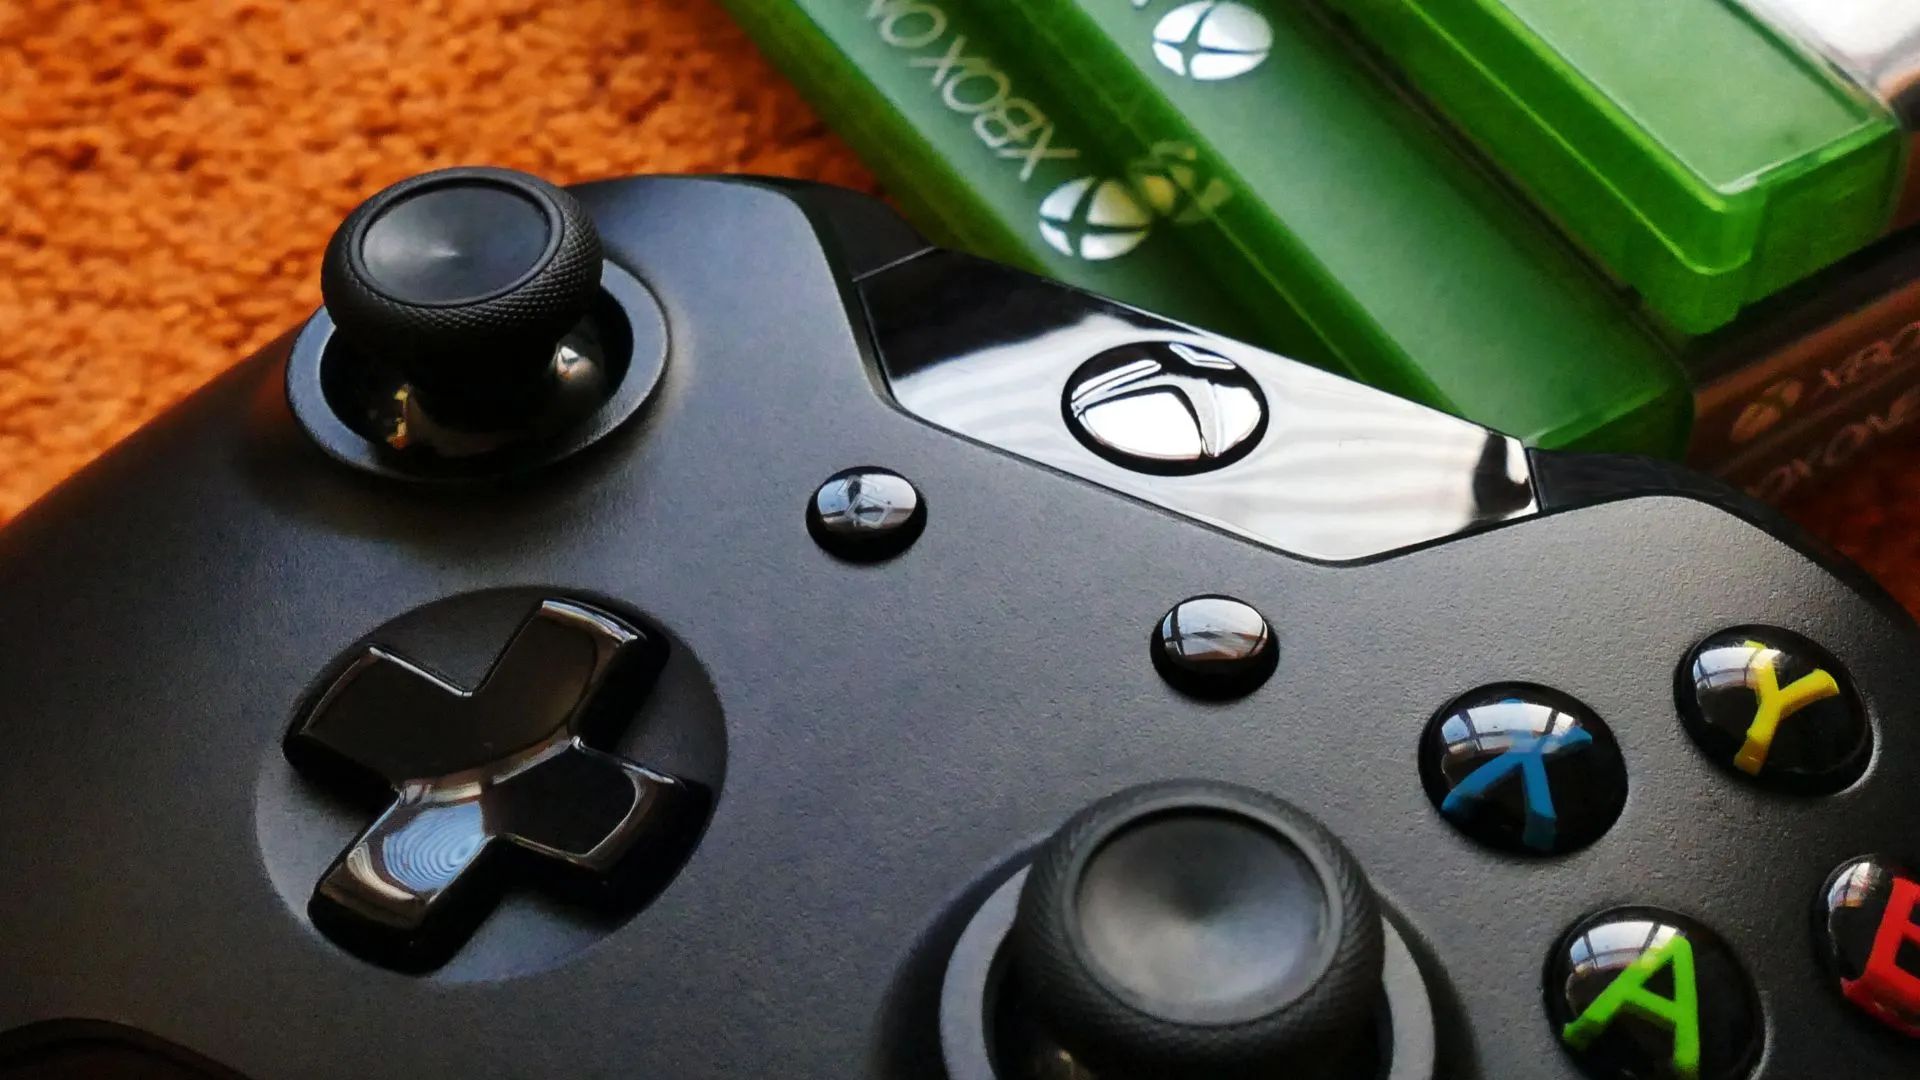 How To Get Xbox To Download Games While Off